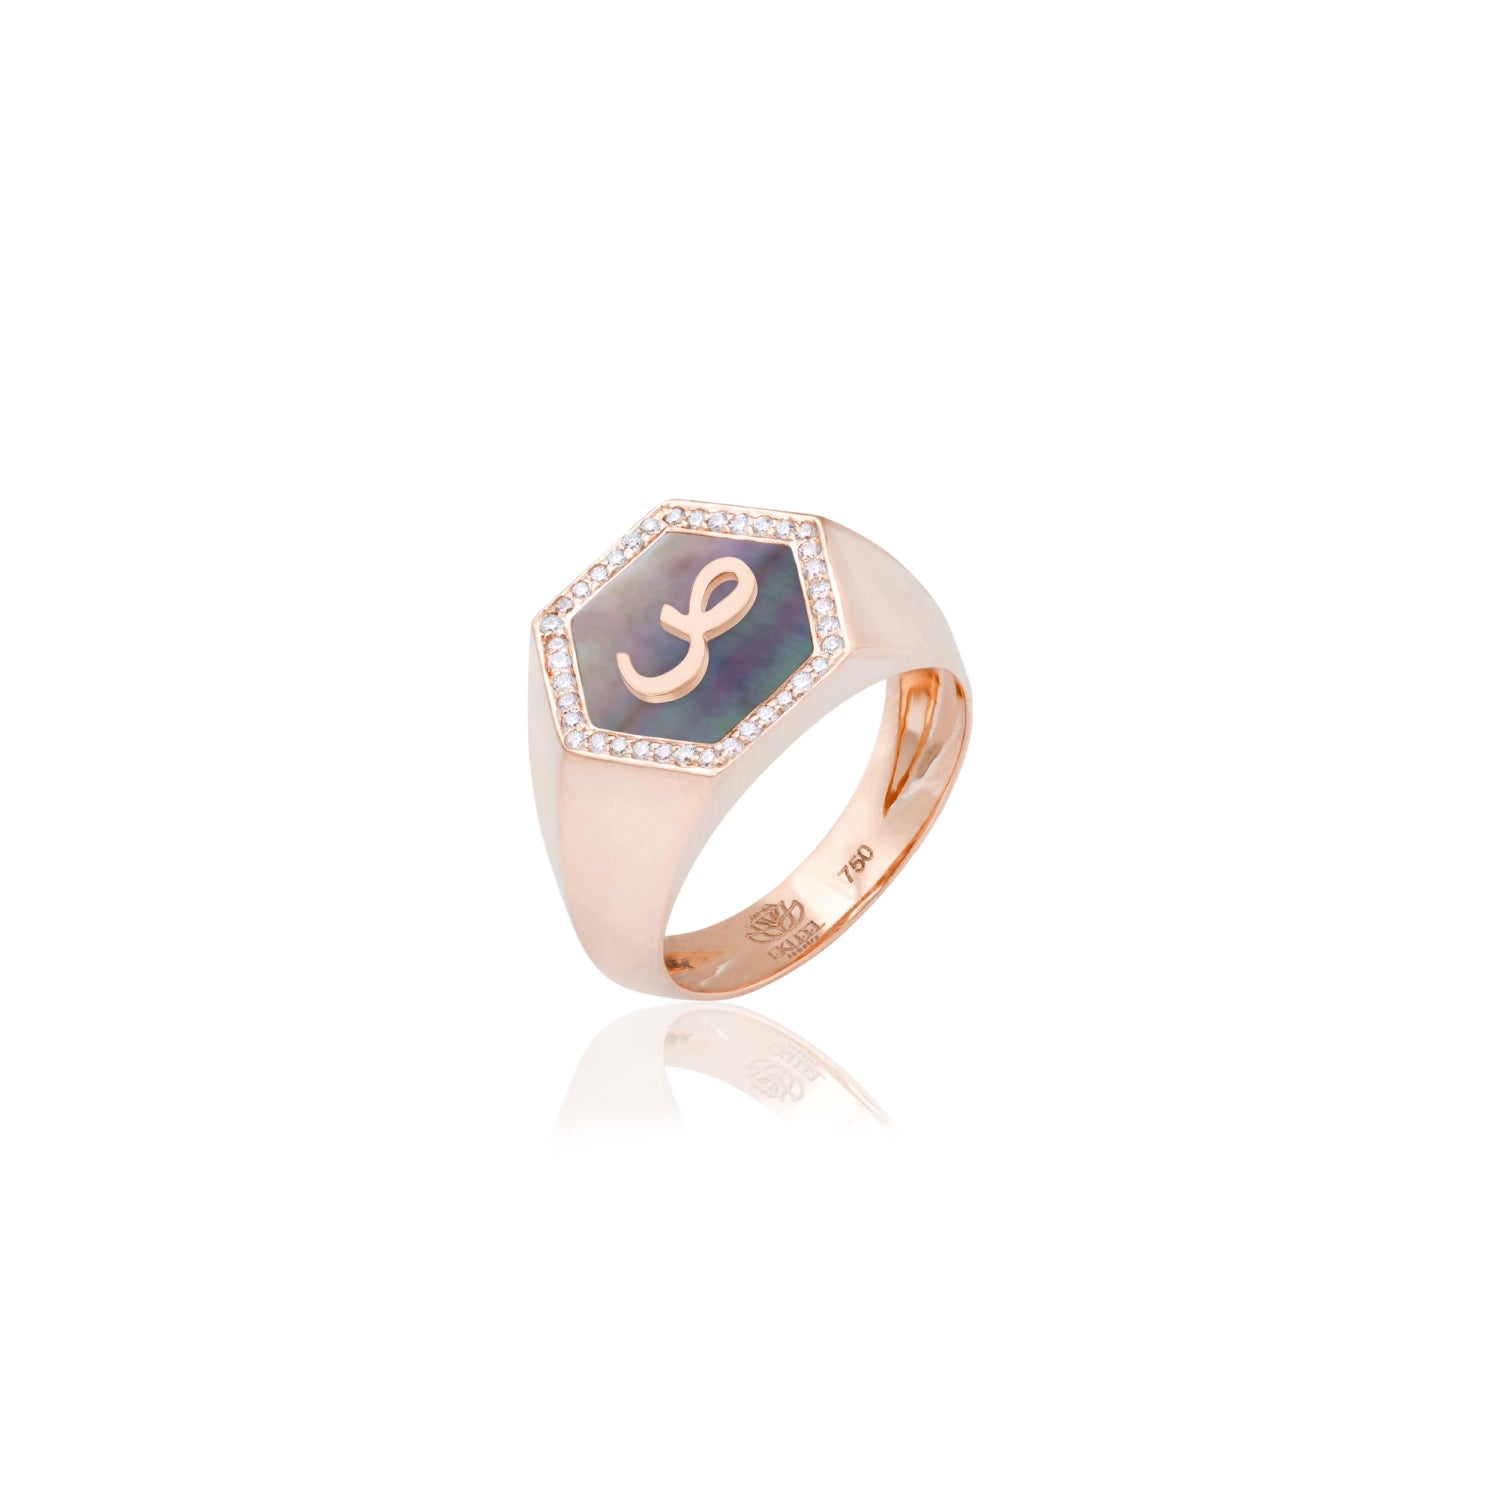 Qamoos 2.0 Letter ص Black Mother of Pearl and Diamond Signet Ring in Rose Gold